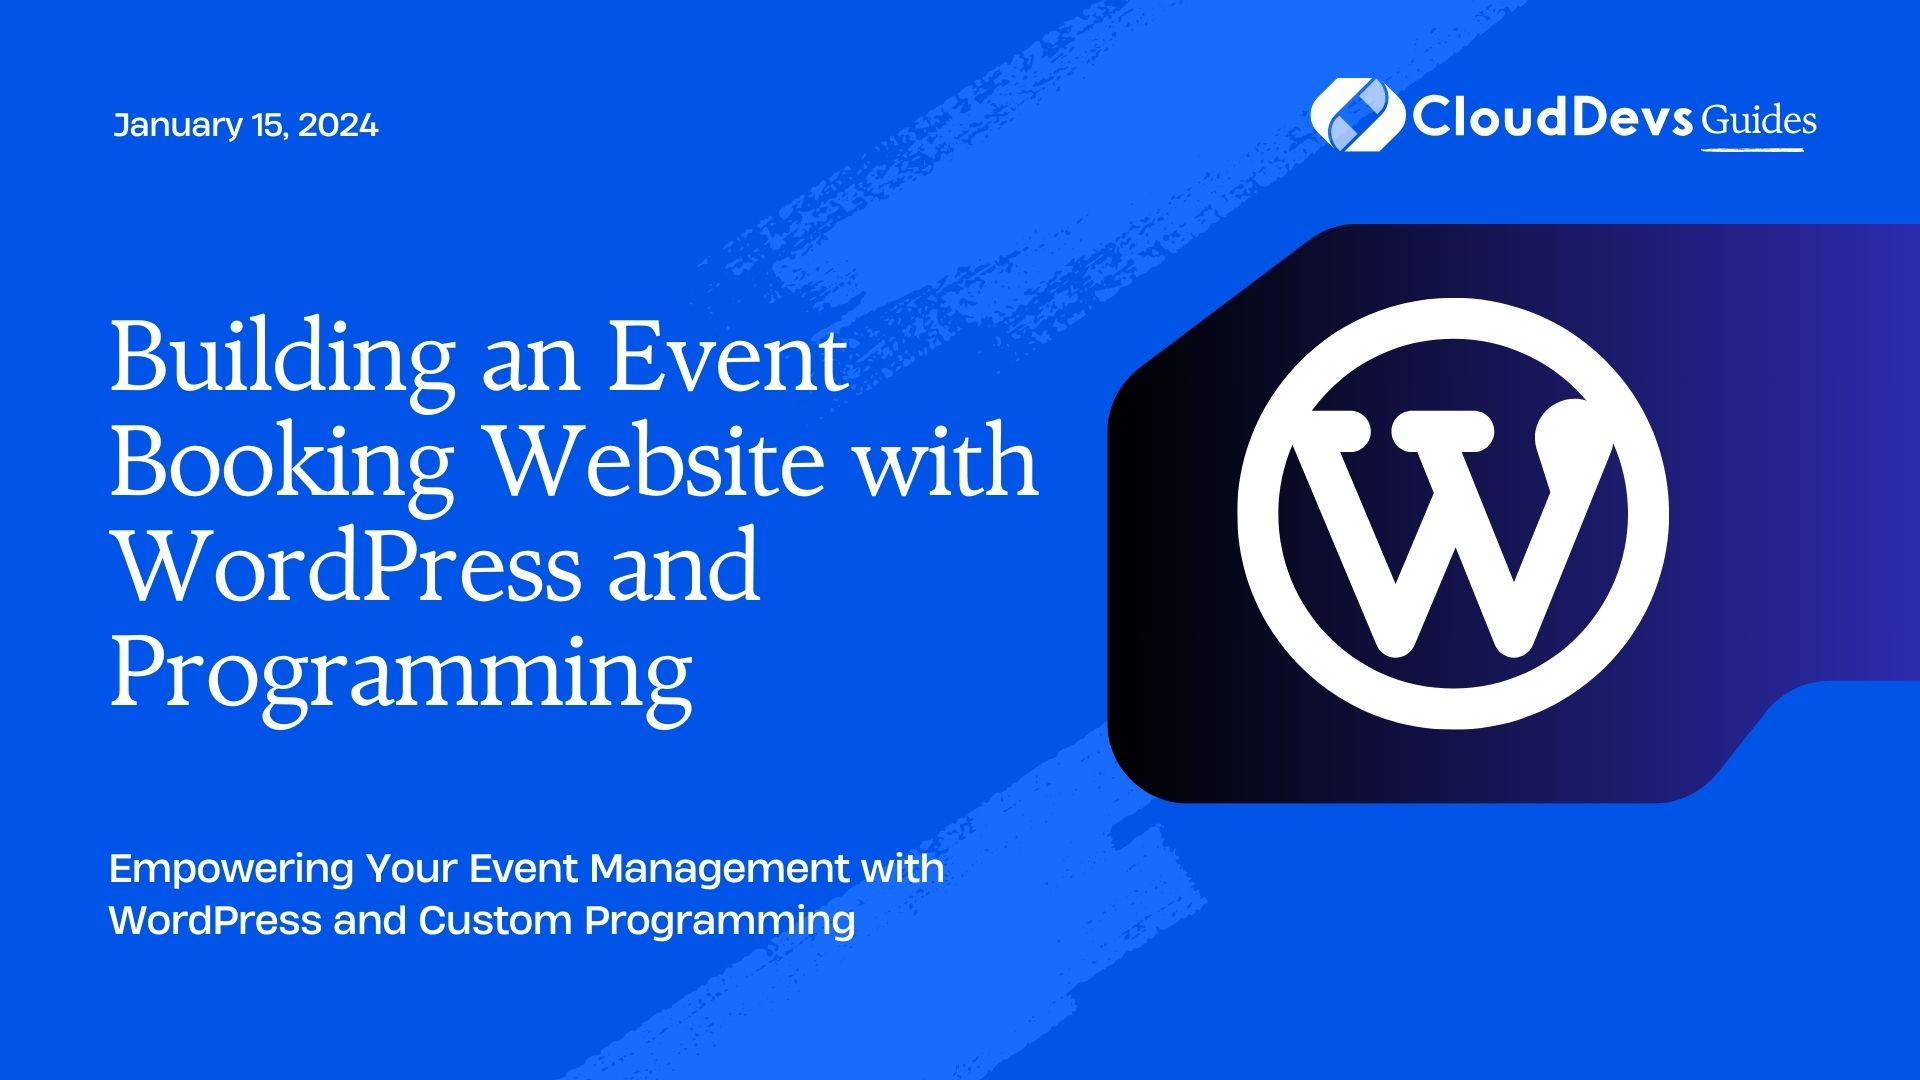 Building an Event Booking Website with WordPress and Programming